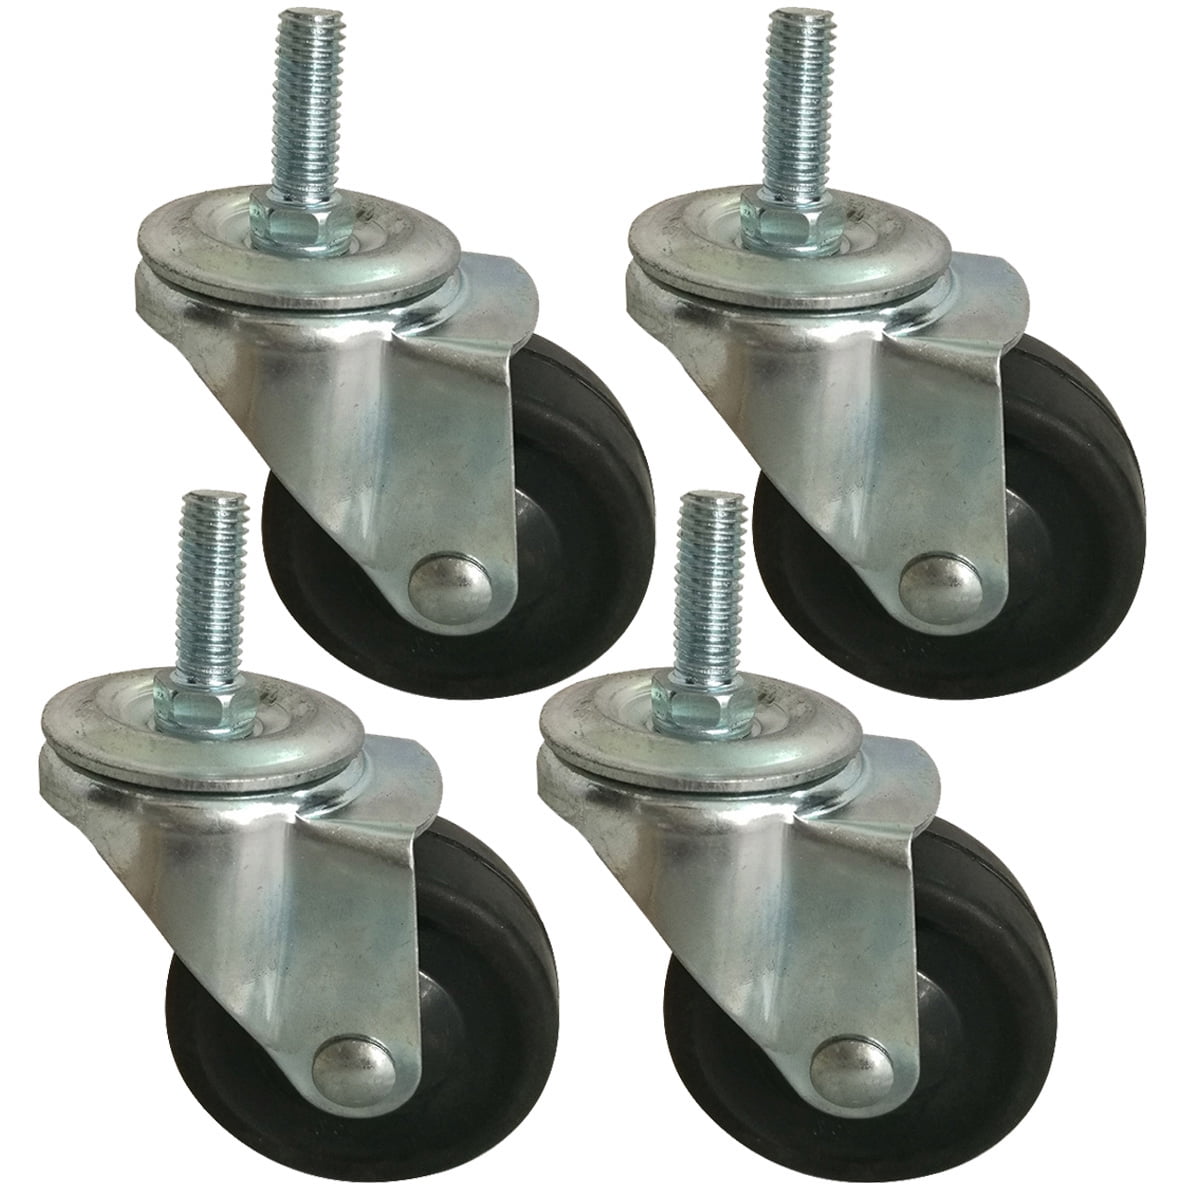 Shepherd 2-1/8 in 2-Pack Adjustable Rubber Bed Frame Casters with Soft Tread 